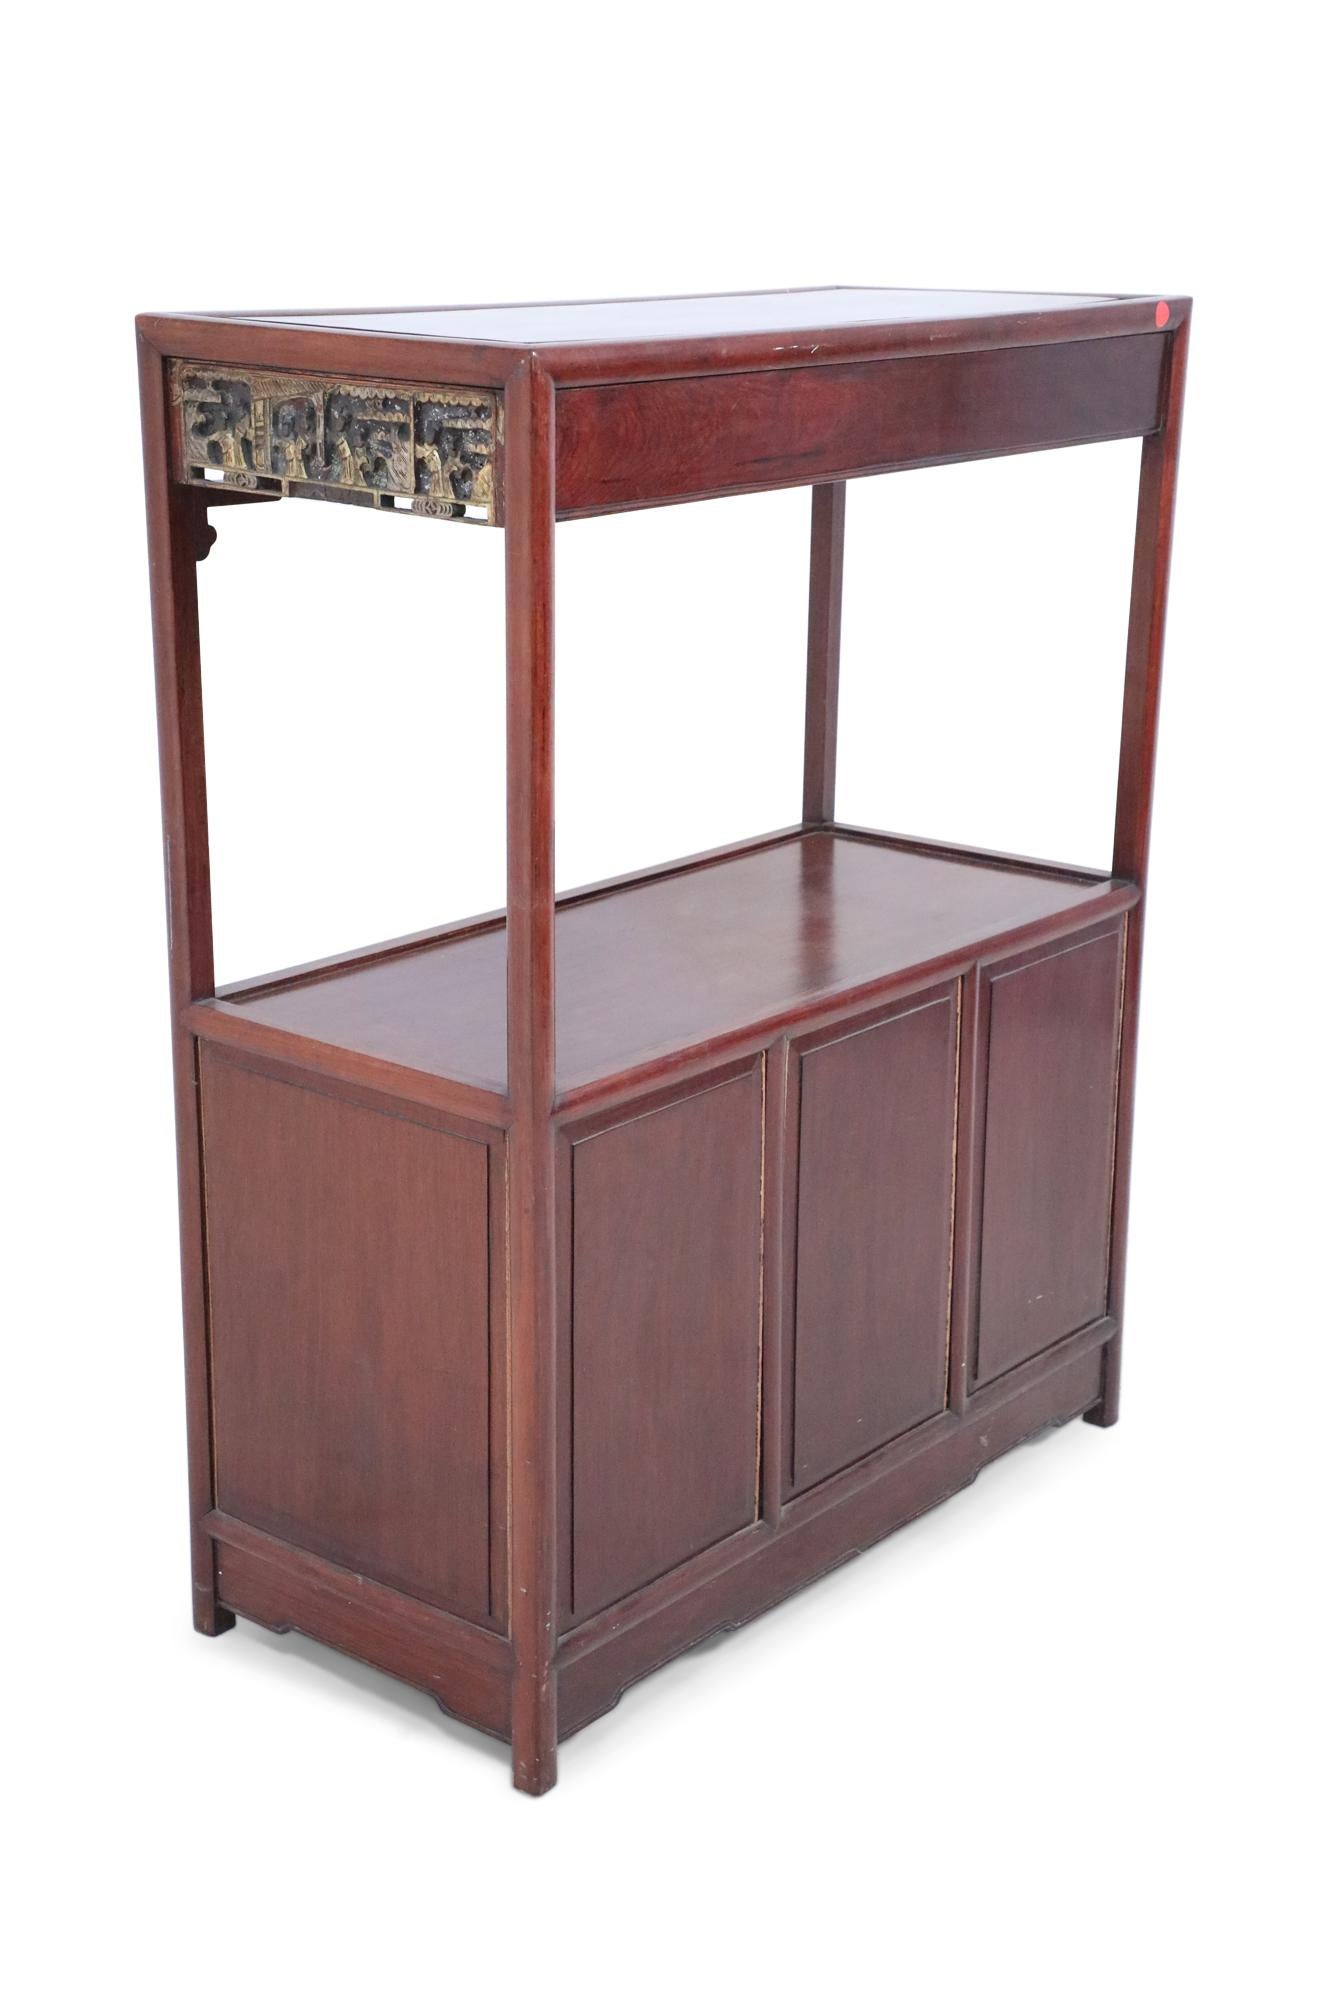 Early 20th Century Chinese Red Carved Wooden Display Cabinet In Good Condition For Sale In New York, NY